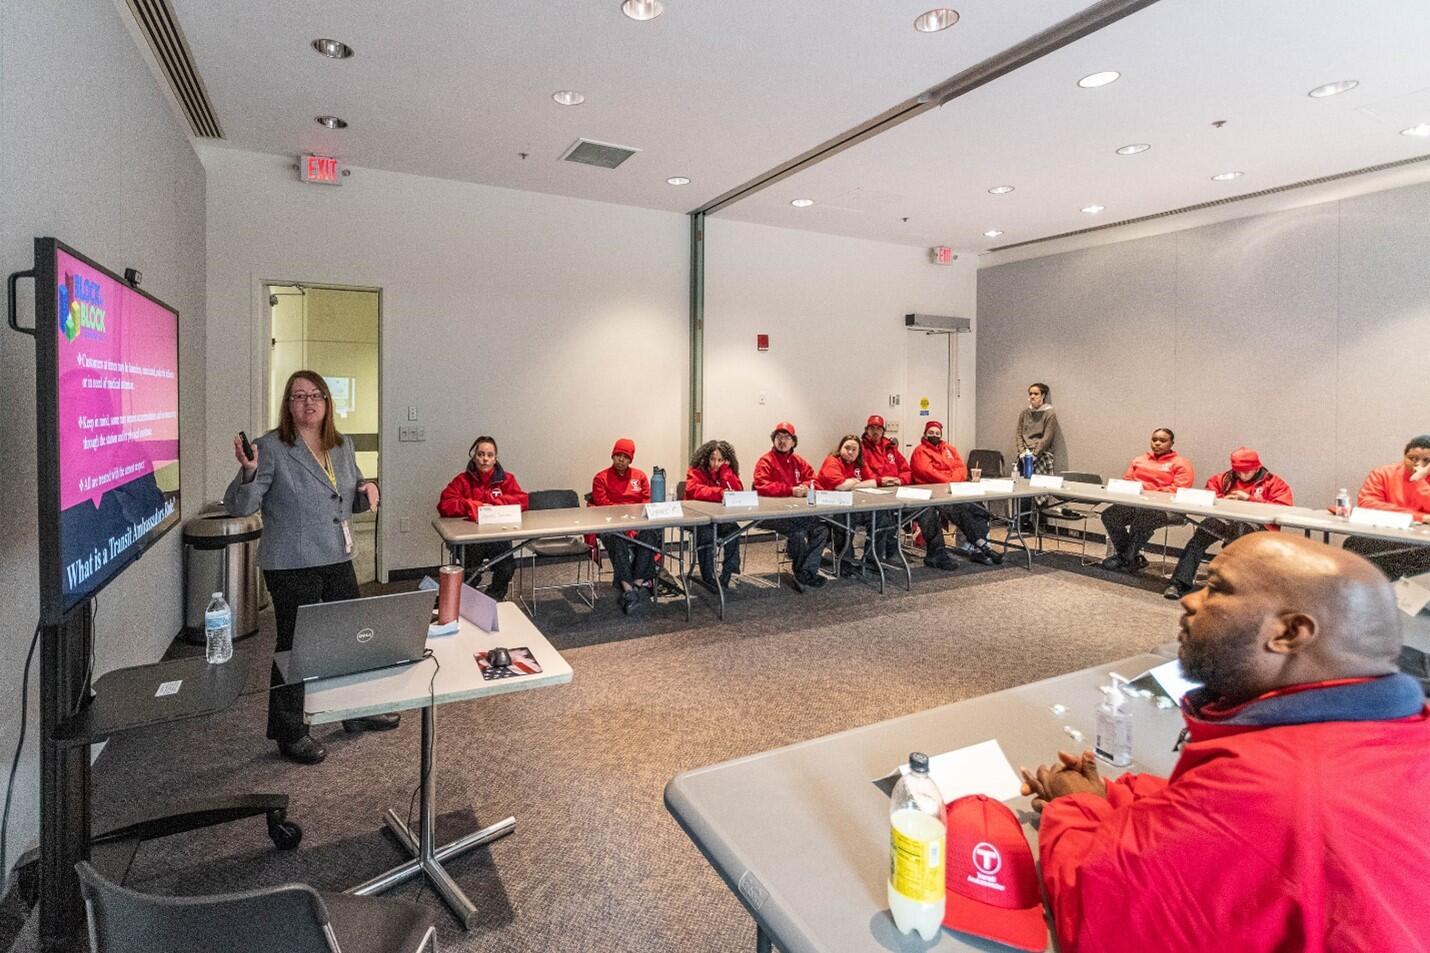 A group of people wearing red uniform shirts sit in a semi-circle facing a presentation